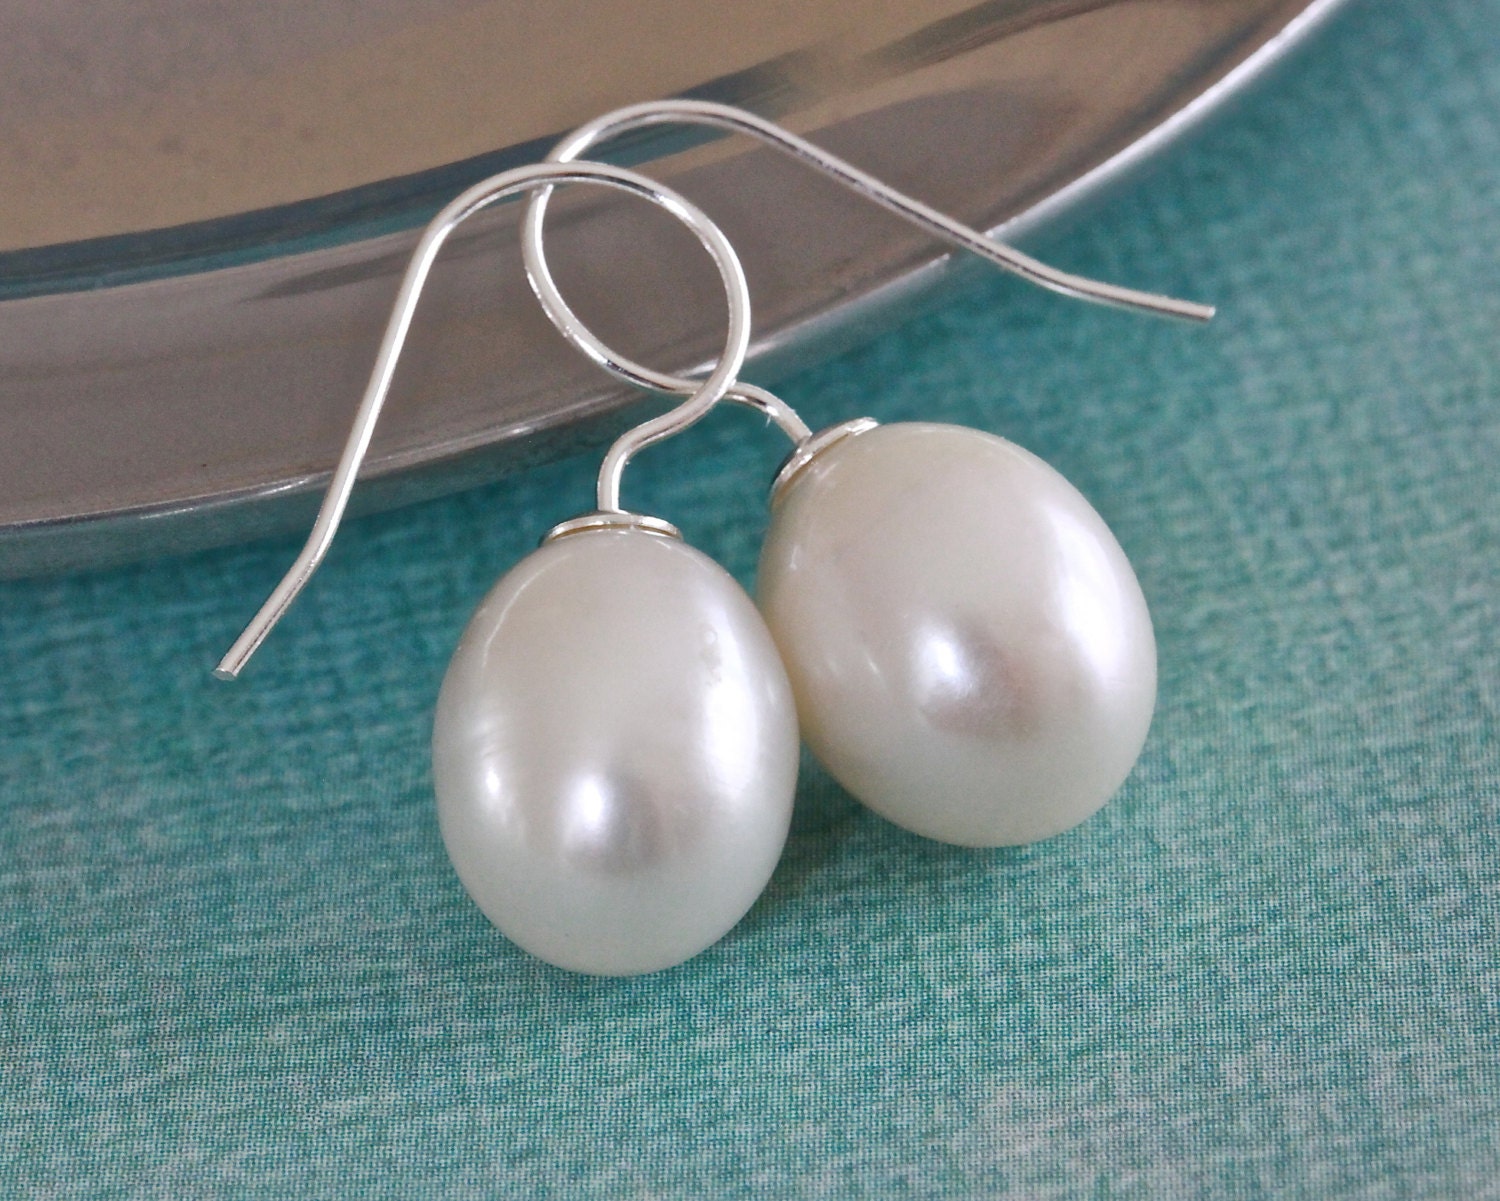 Large White Pearl Earrings with Single Freshwater Pearl, Sterling Silver Earrings - ThePassionatePearl